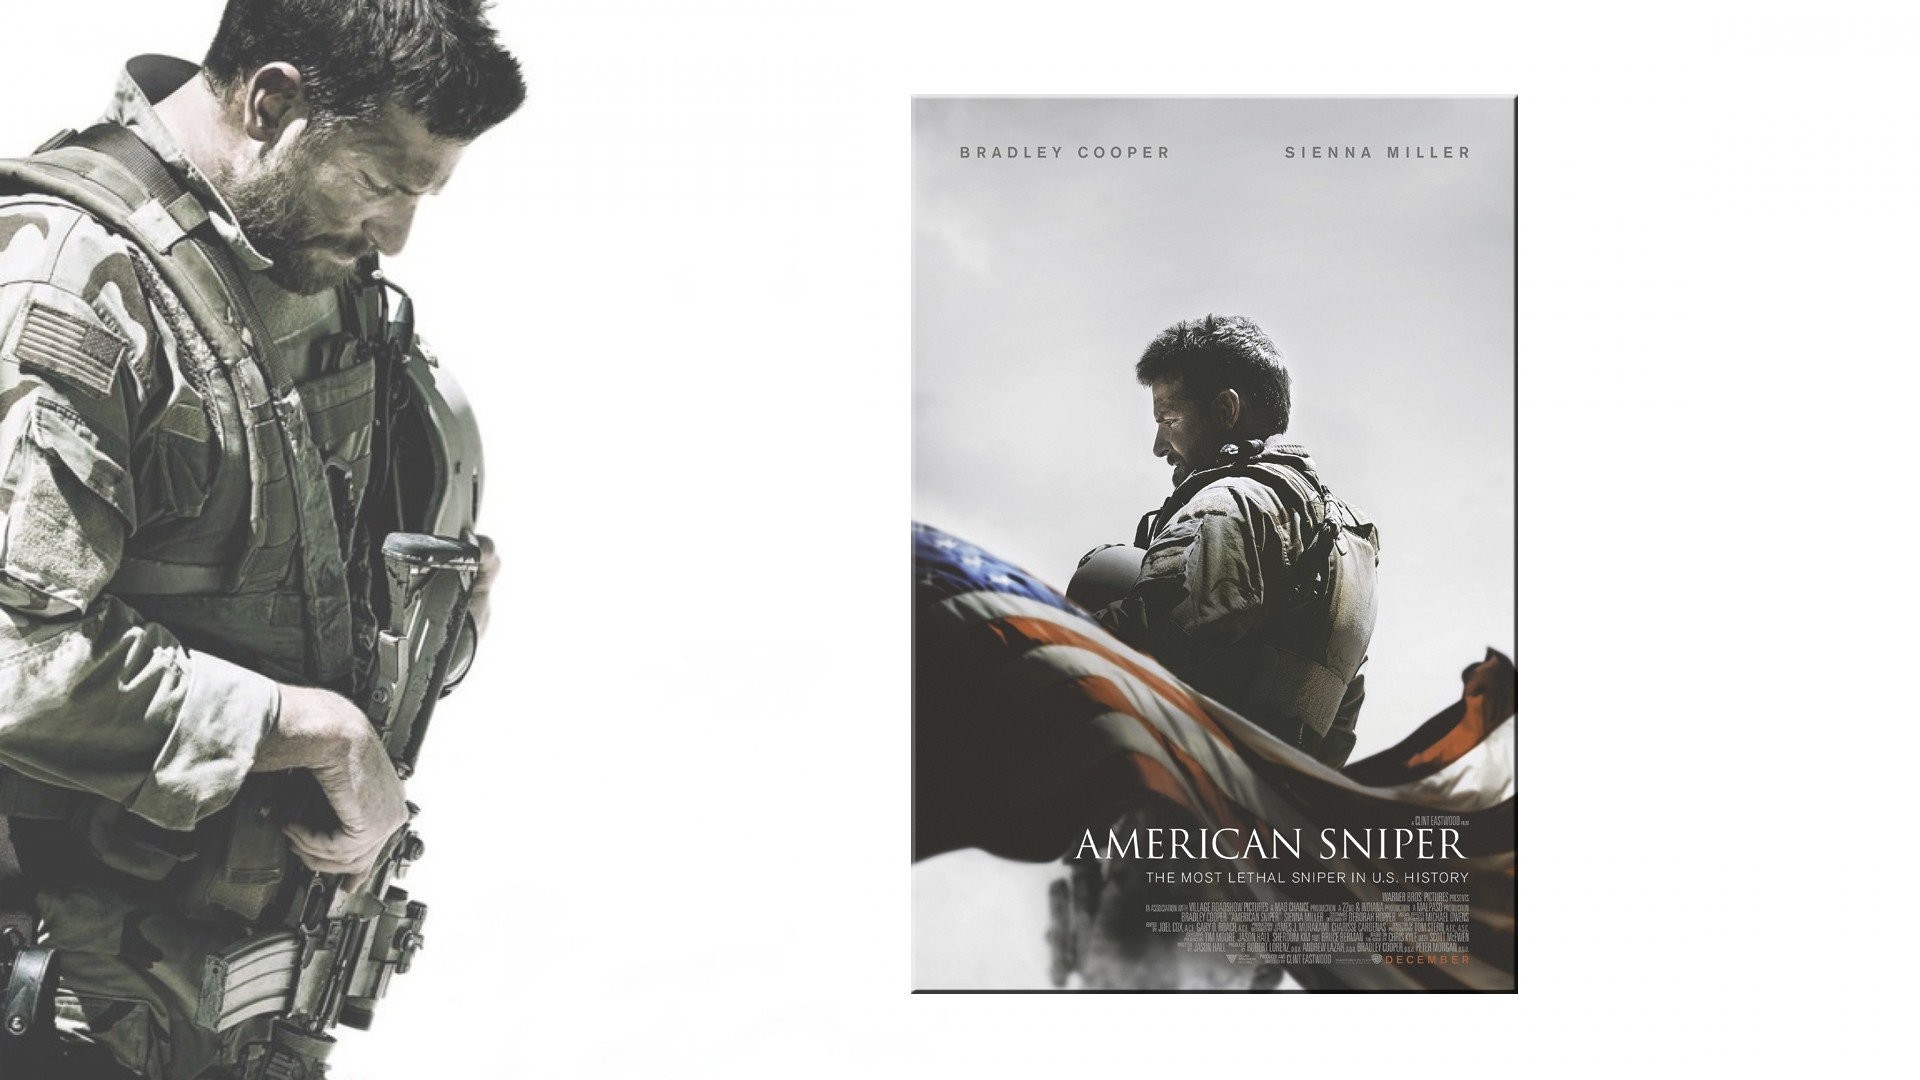 AMERICAN SNIPER biography action military warrior soldier 1americansniper clint eastwood war fighting weapon gun wallpaper 602840